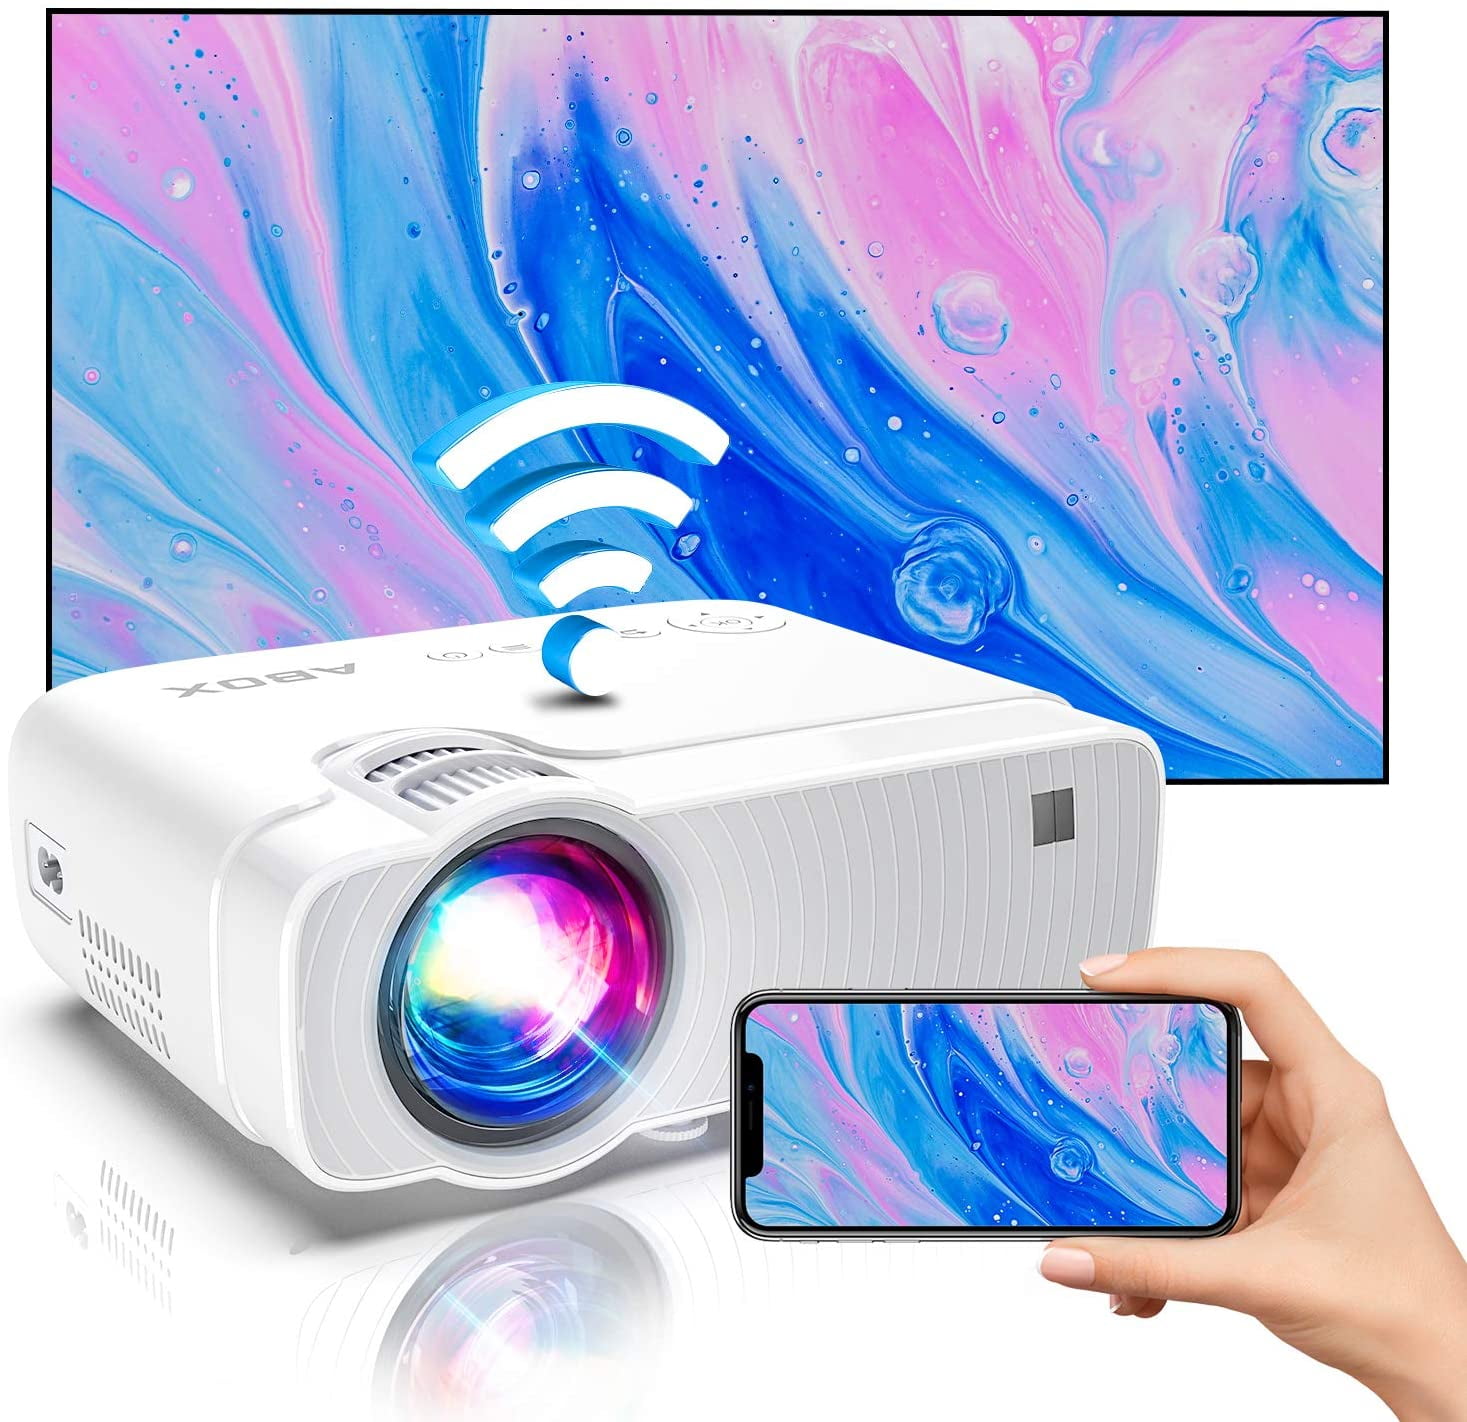 【2021 Upgraged】Projector for Outdoor Movies| WiFi Mini Ultra Portable TV  Projector Home Cinema Home Theater For School Party GC357